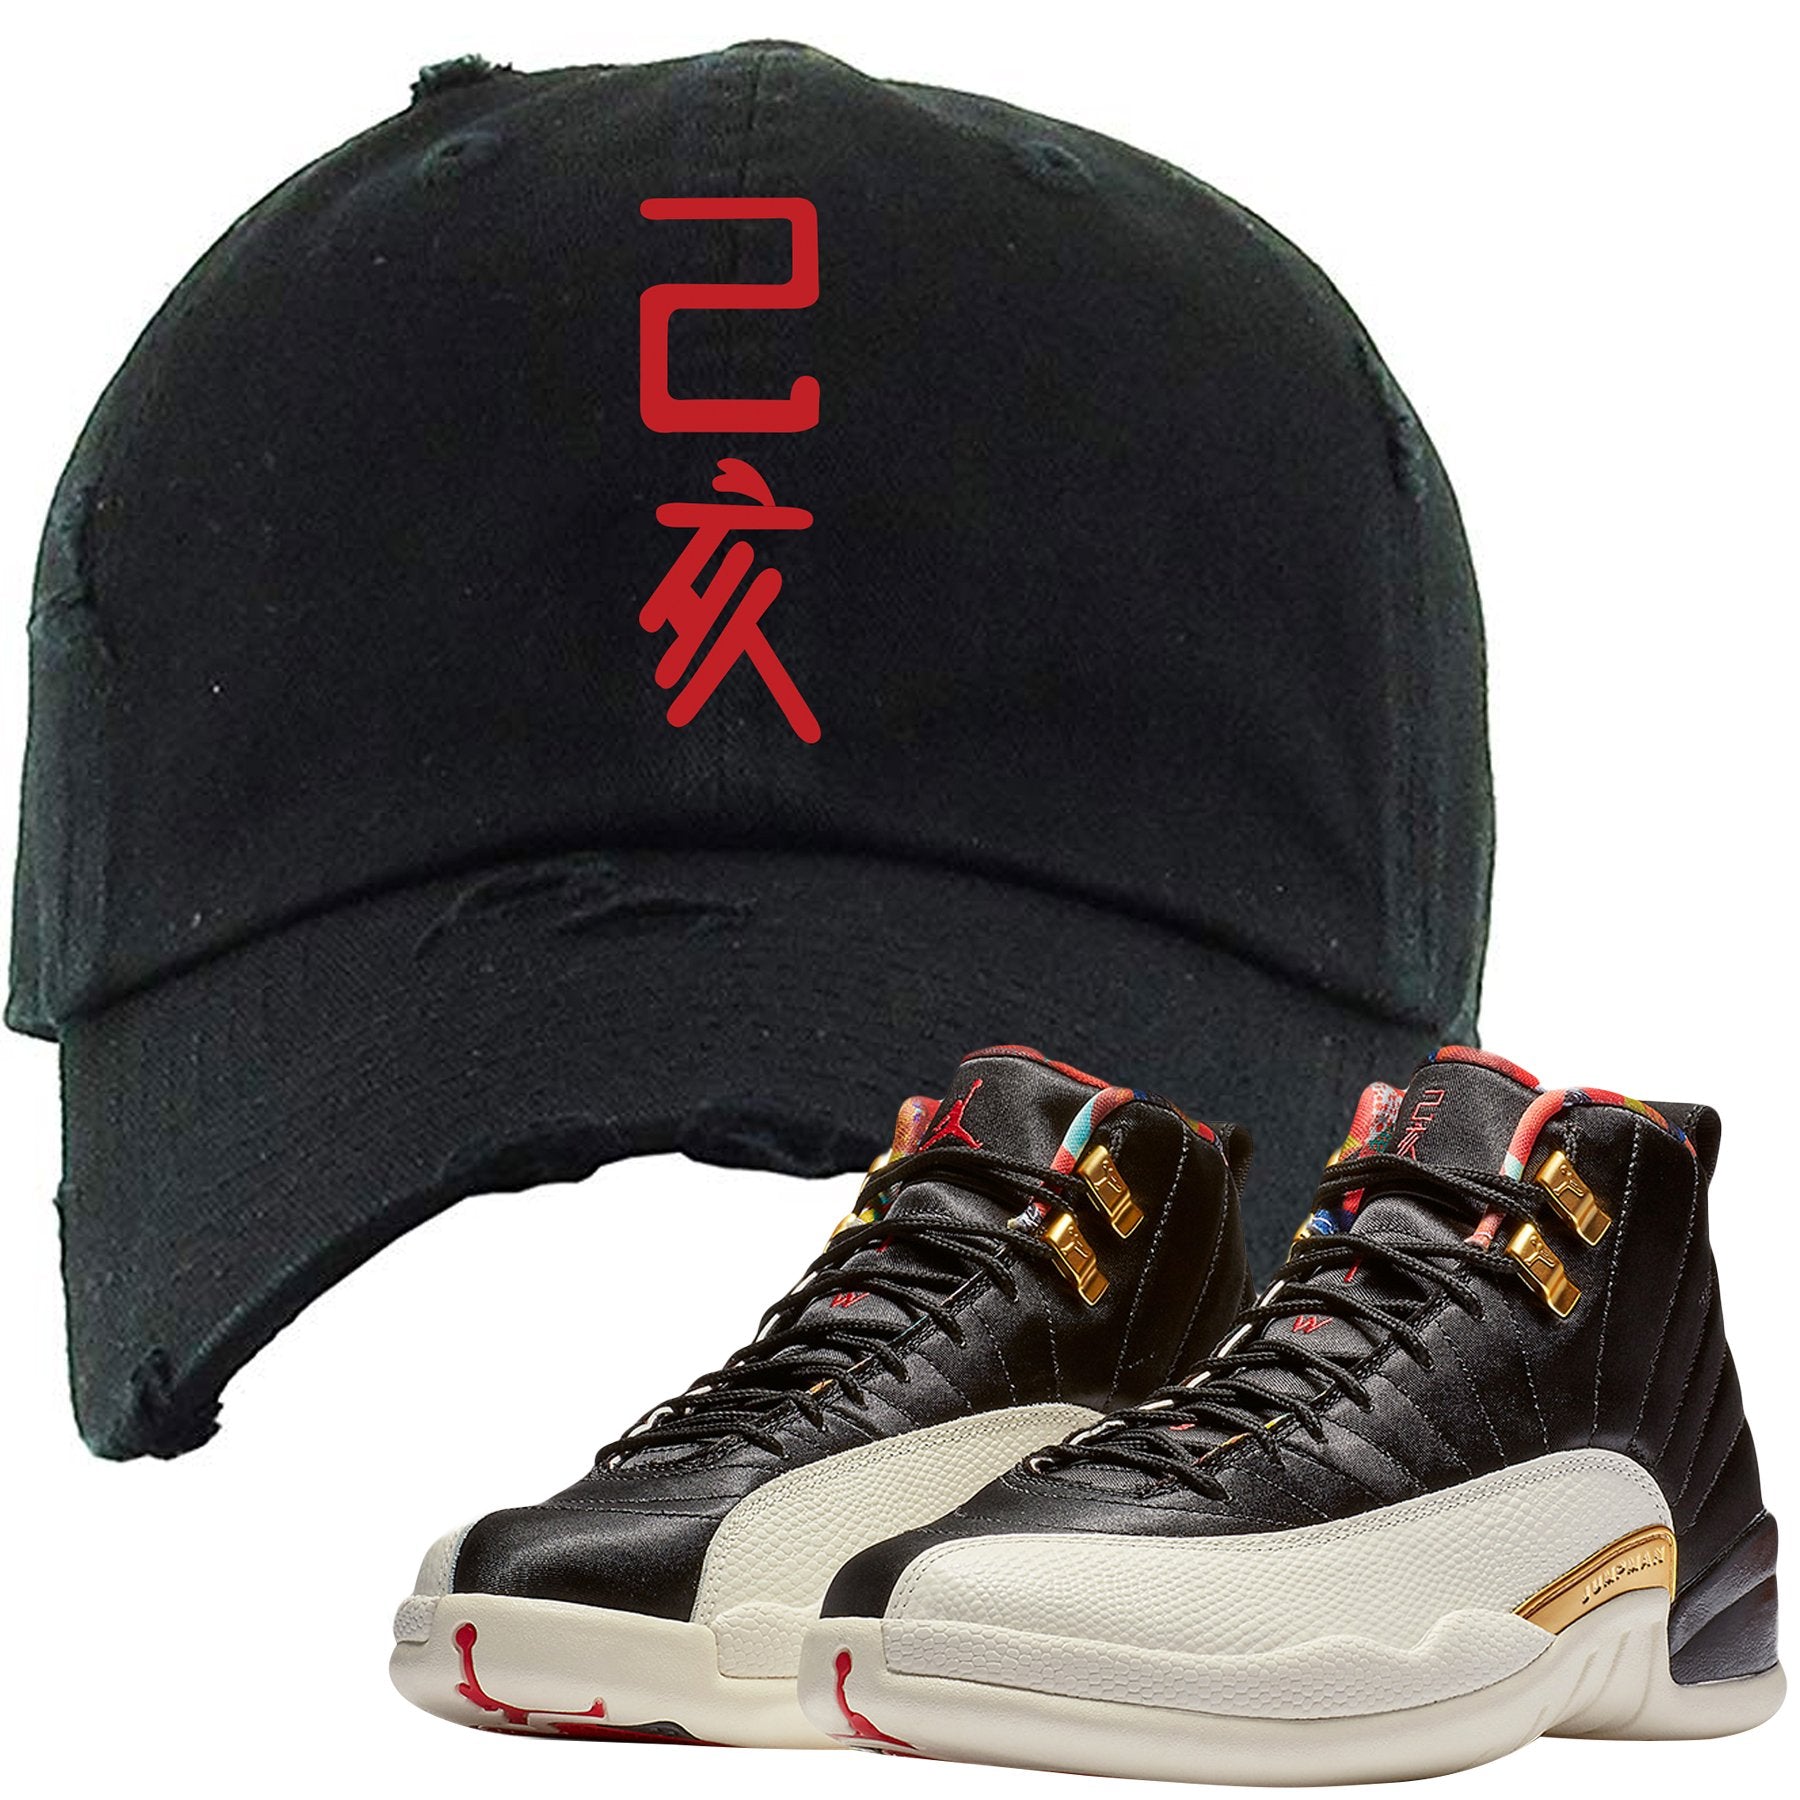 Rock the Jordan 12 Chinese New Year sneaker matching distressed dad hat to match your pair of Chinese New Year 12s